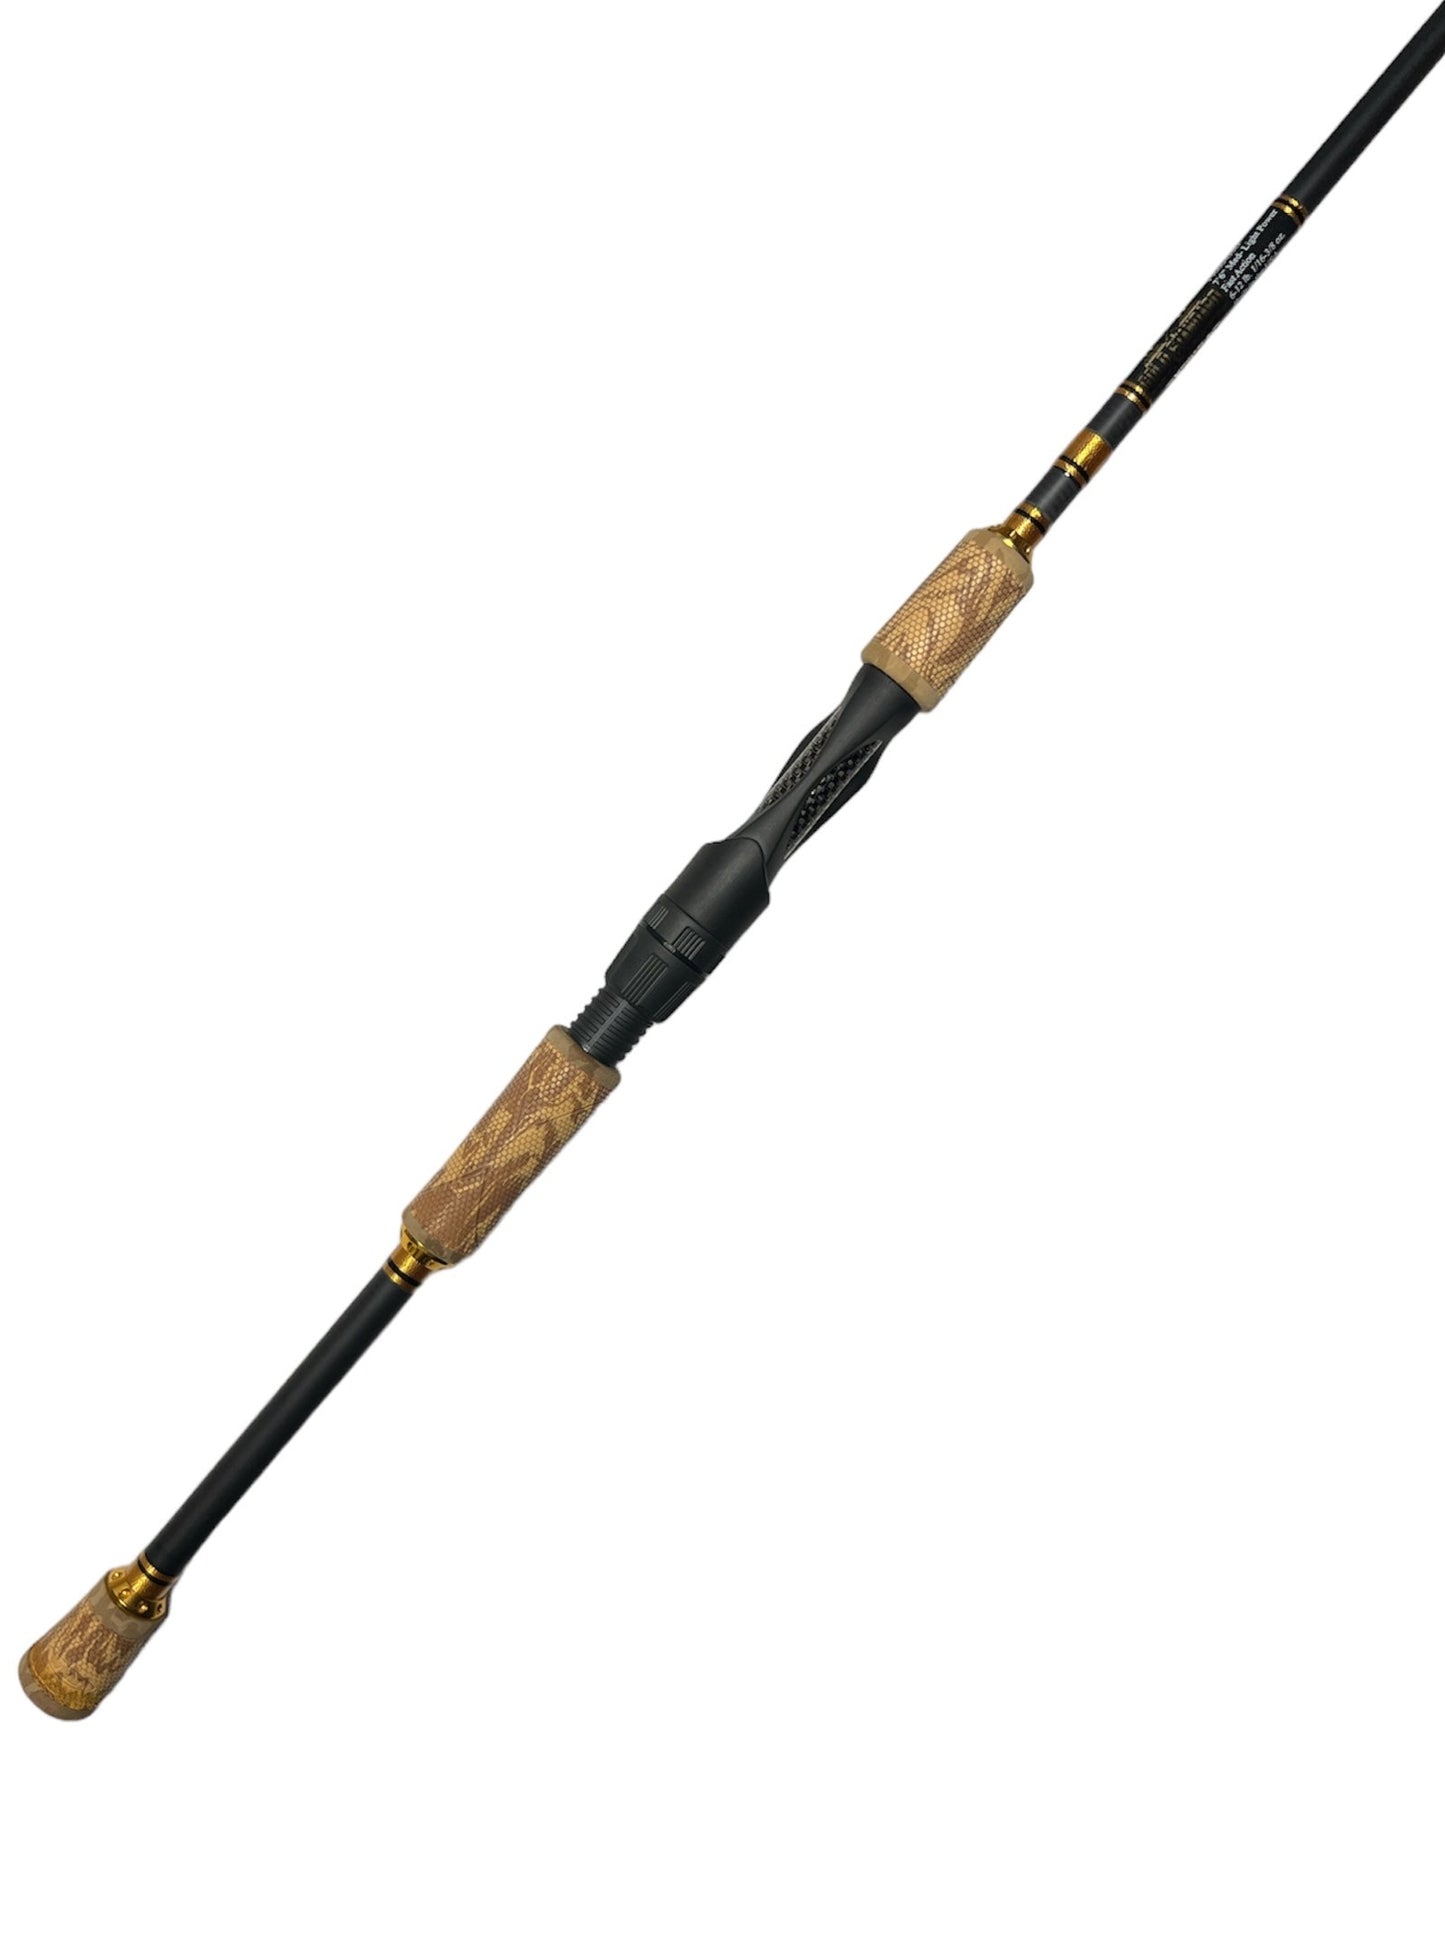 7'6" Med-Light Power Fast Action Versa Series Pre-Built Spinning Rod w/ Microwave Guides - Gold & Black